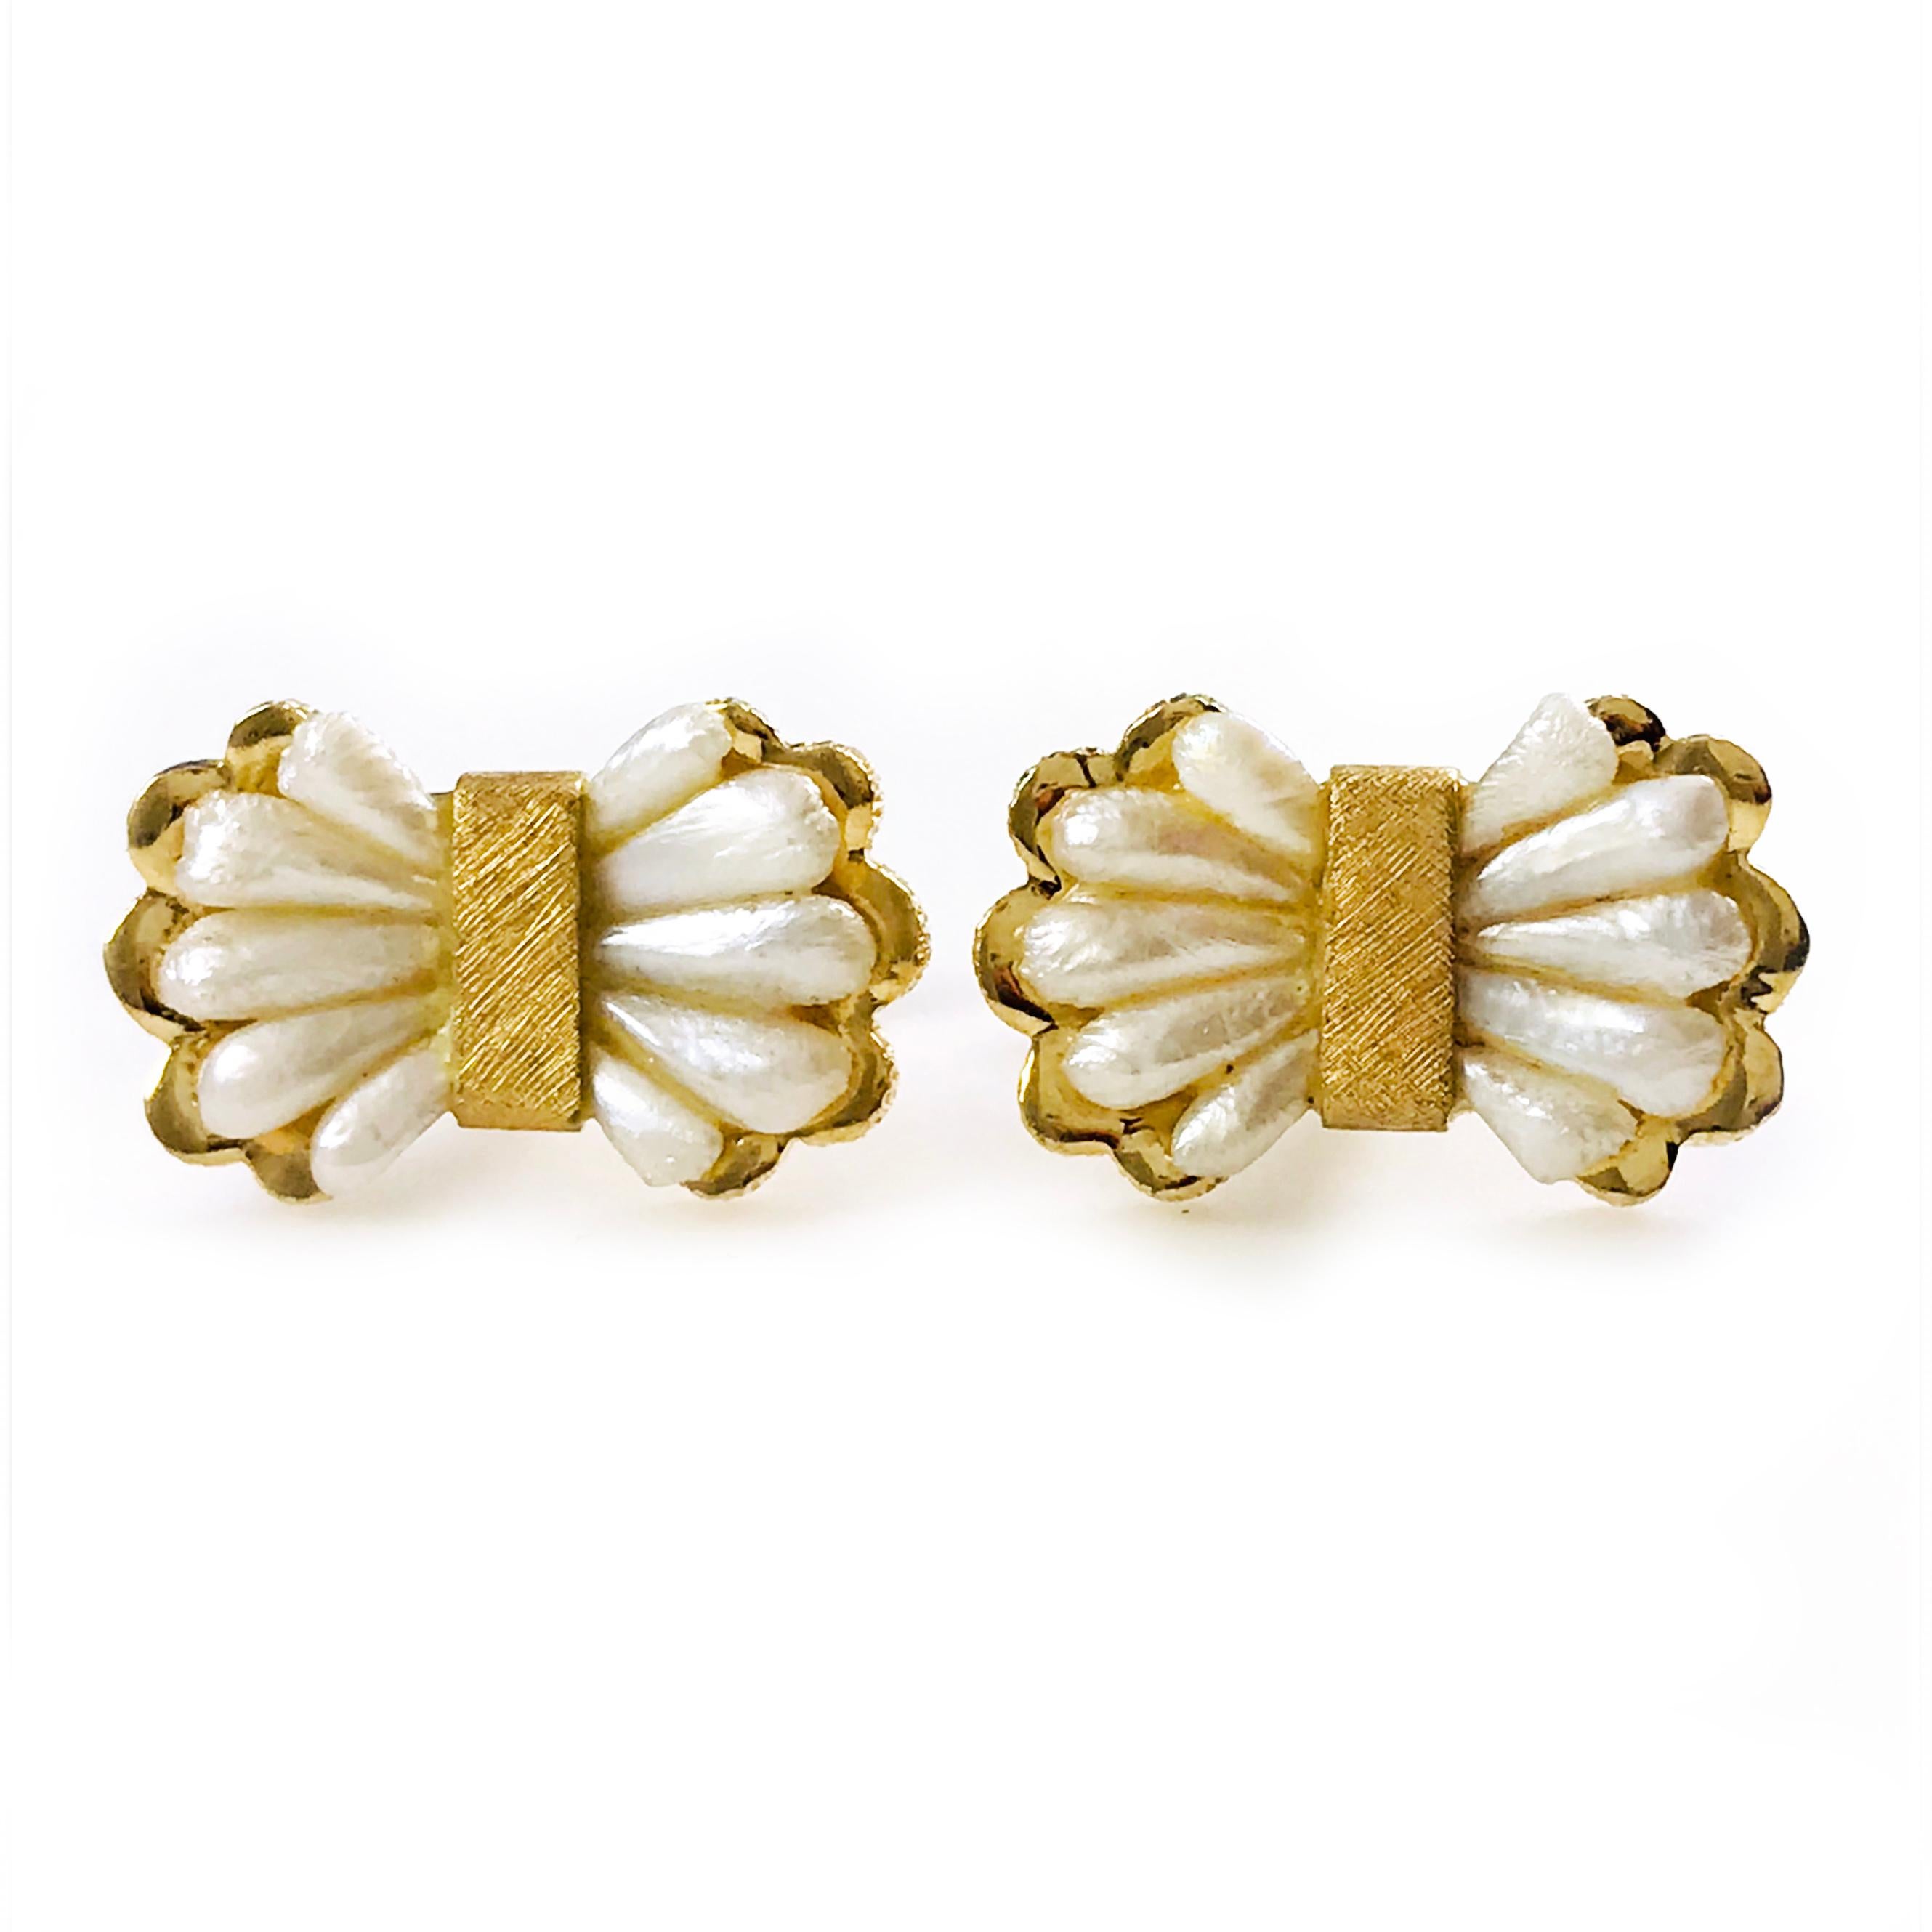 Bow-Shaped Biwa Pearl 14K Gold Cufflinks. The cufflink fronts are bow-shaped with five seashell-like sections on both sides and a gold center. There are three finishes present on these unique cufflinks, bark finish on the gold surround, Florentine